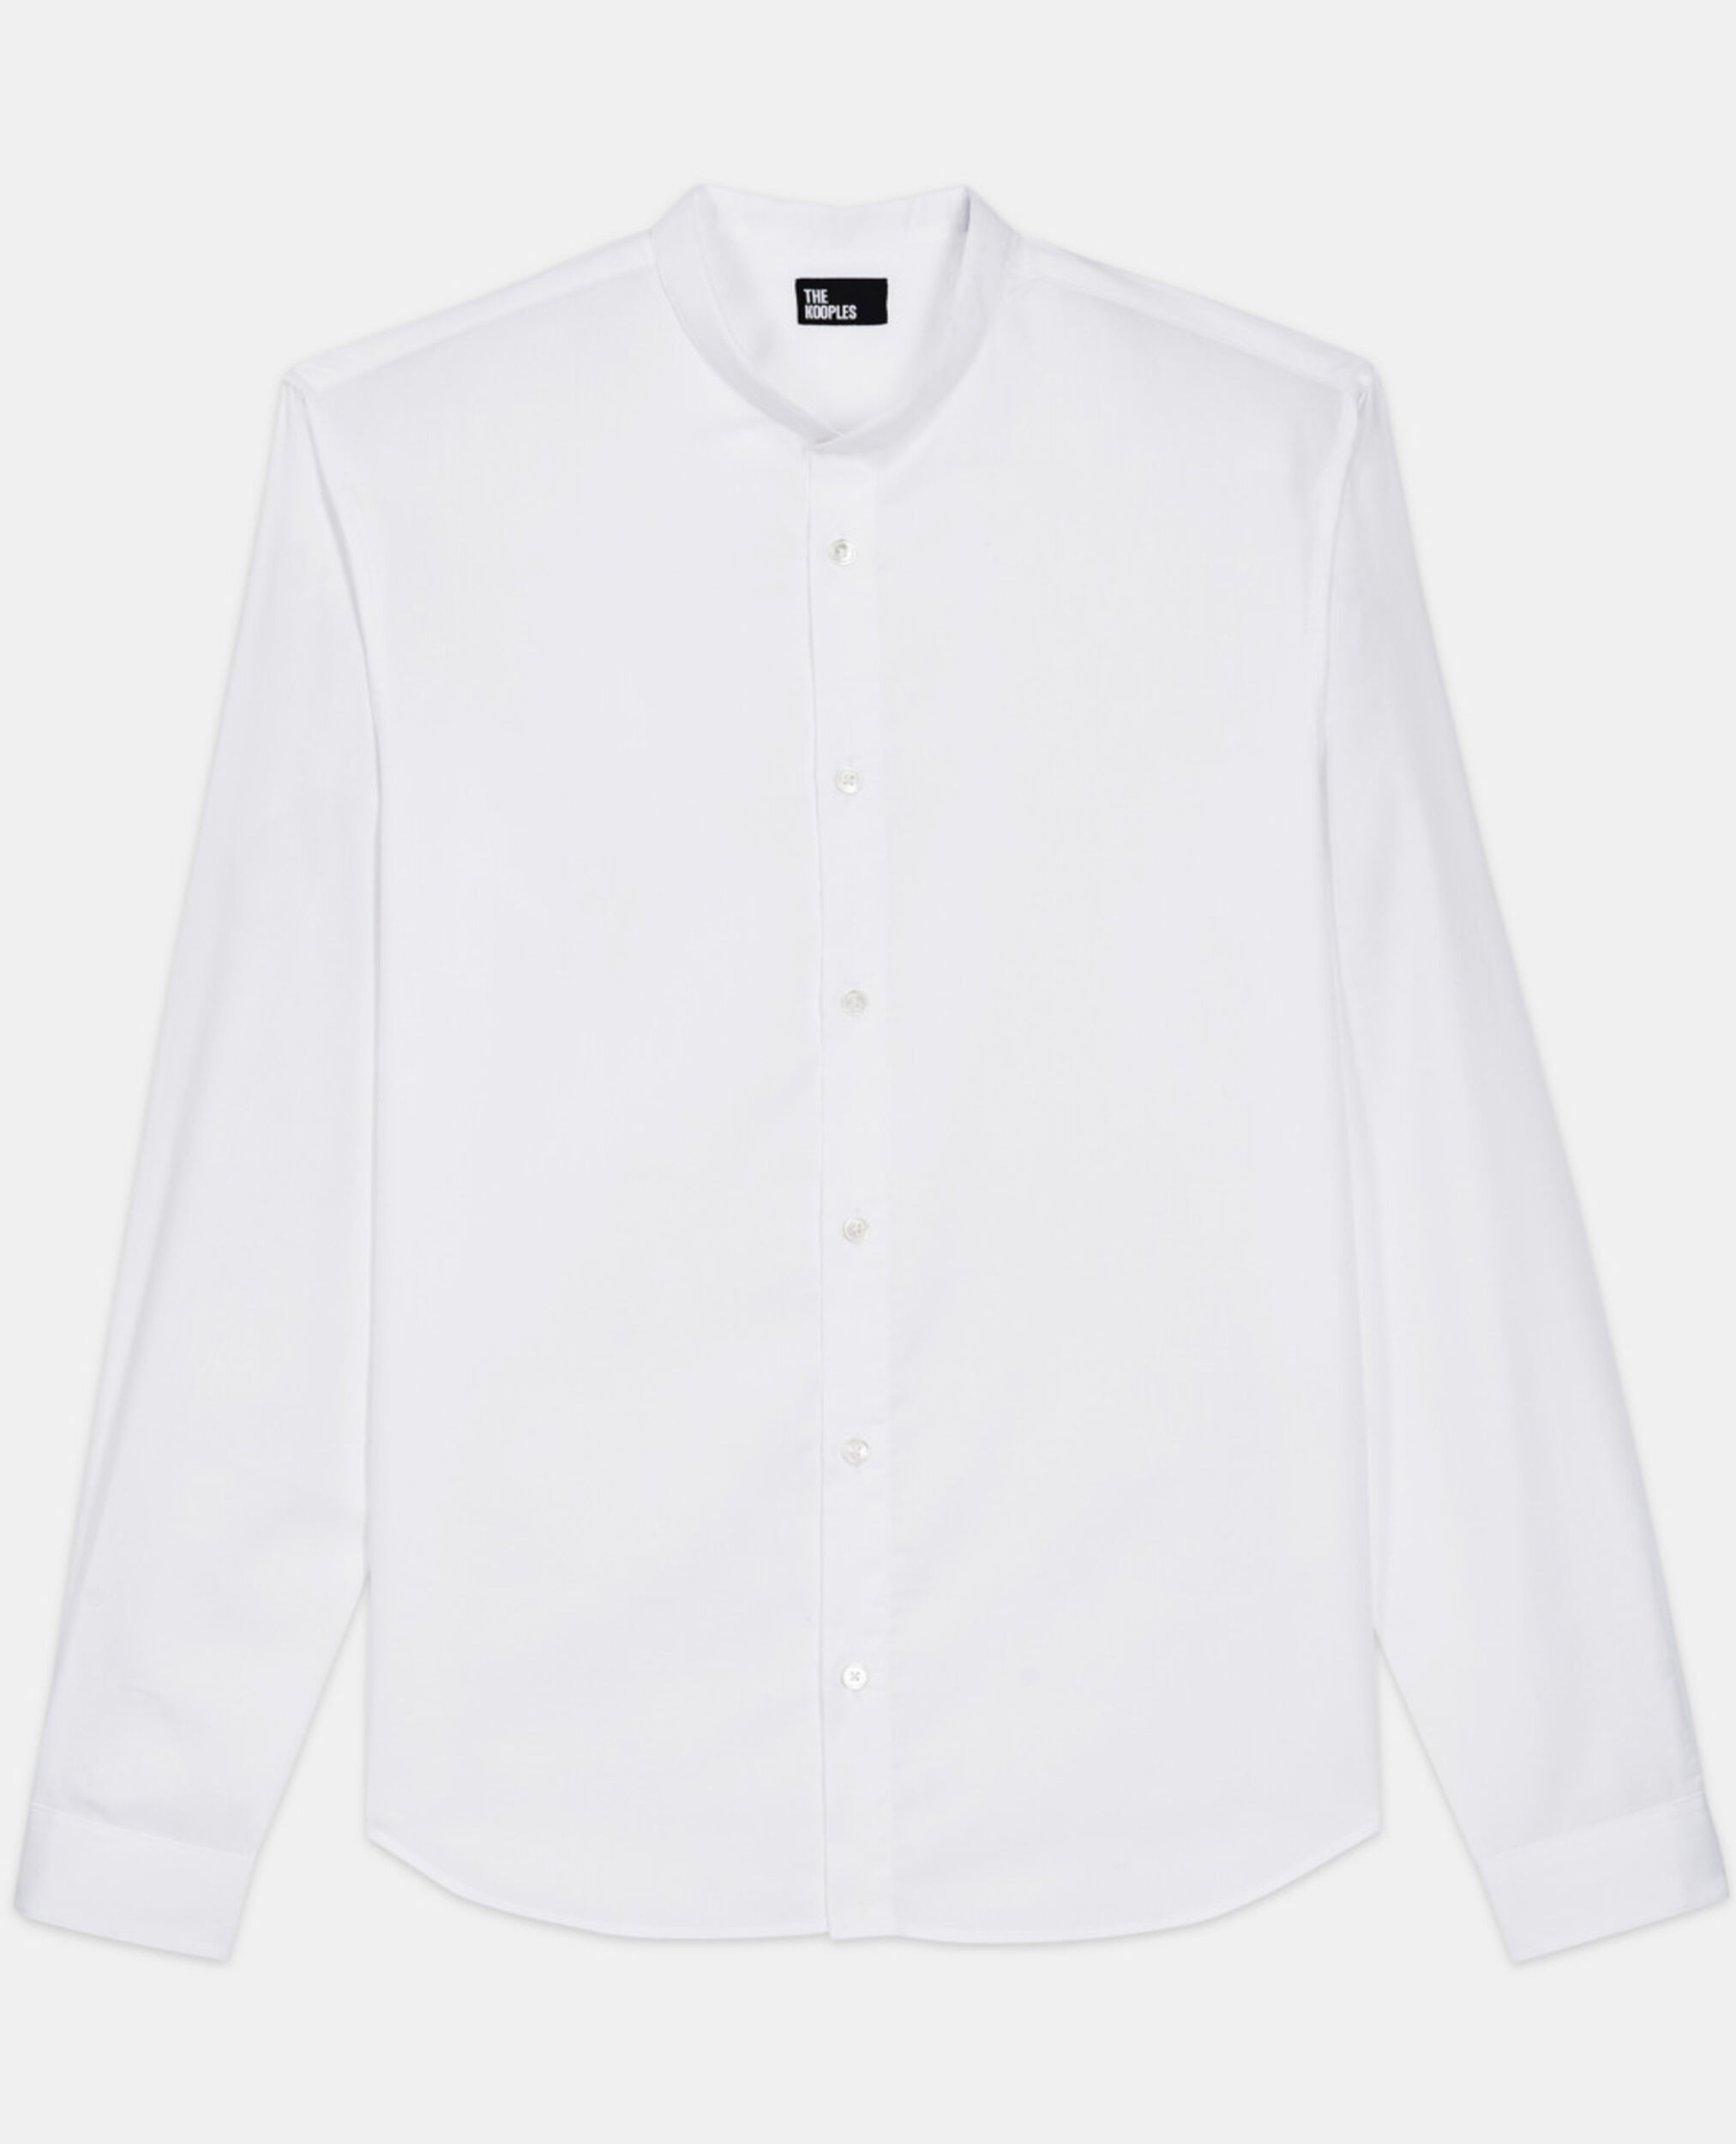 Chemise col officier blanche, WHITE, hi-res image number null